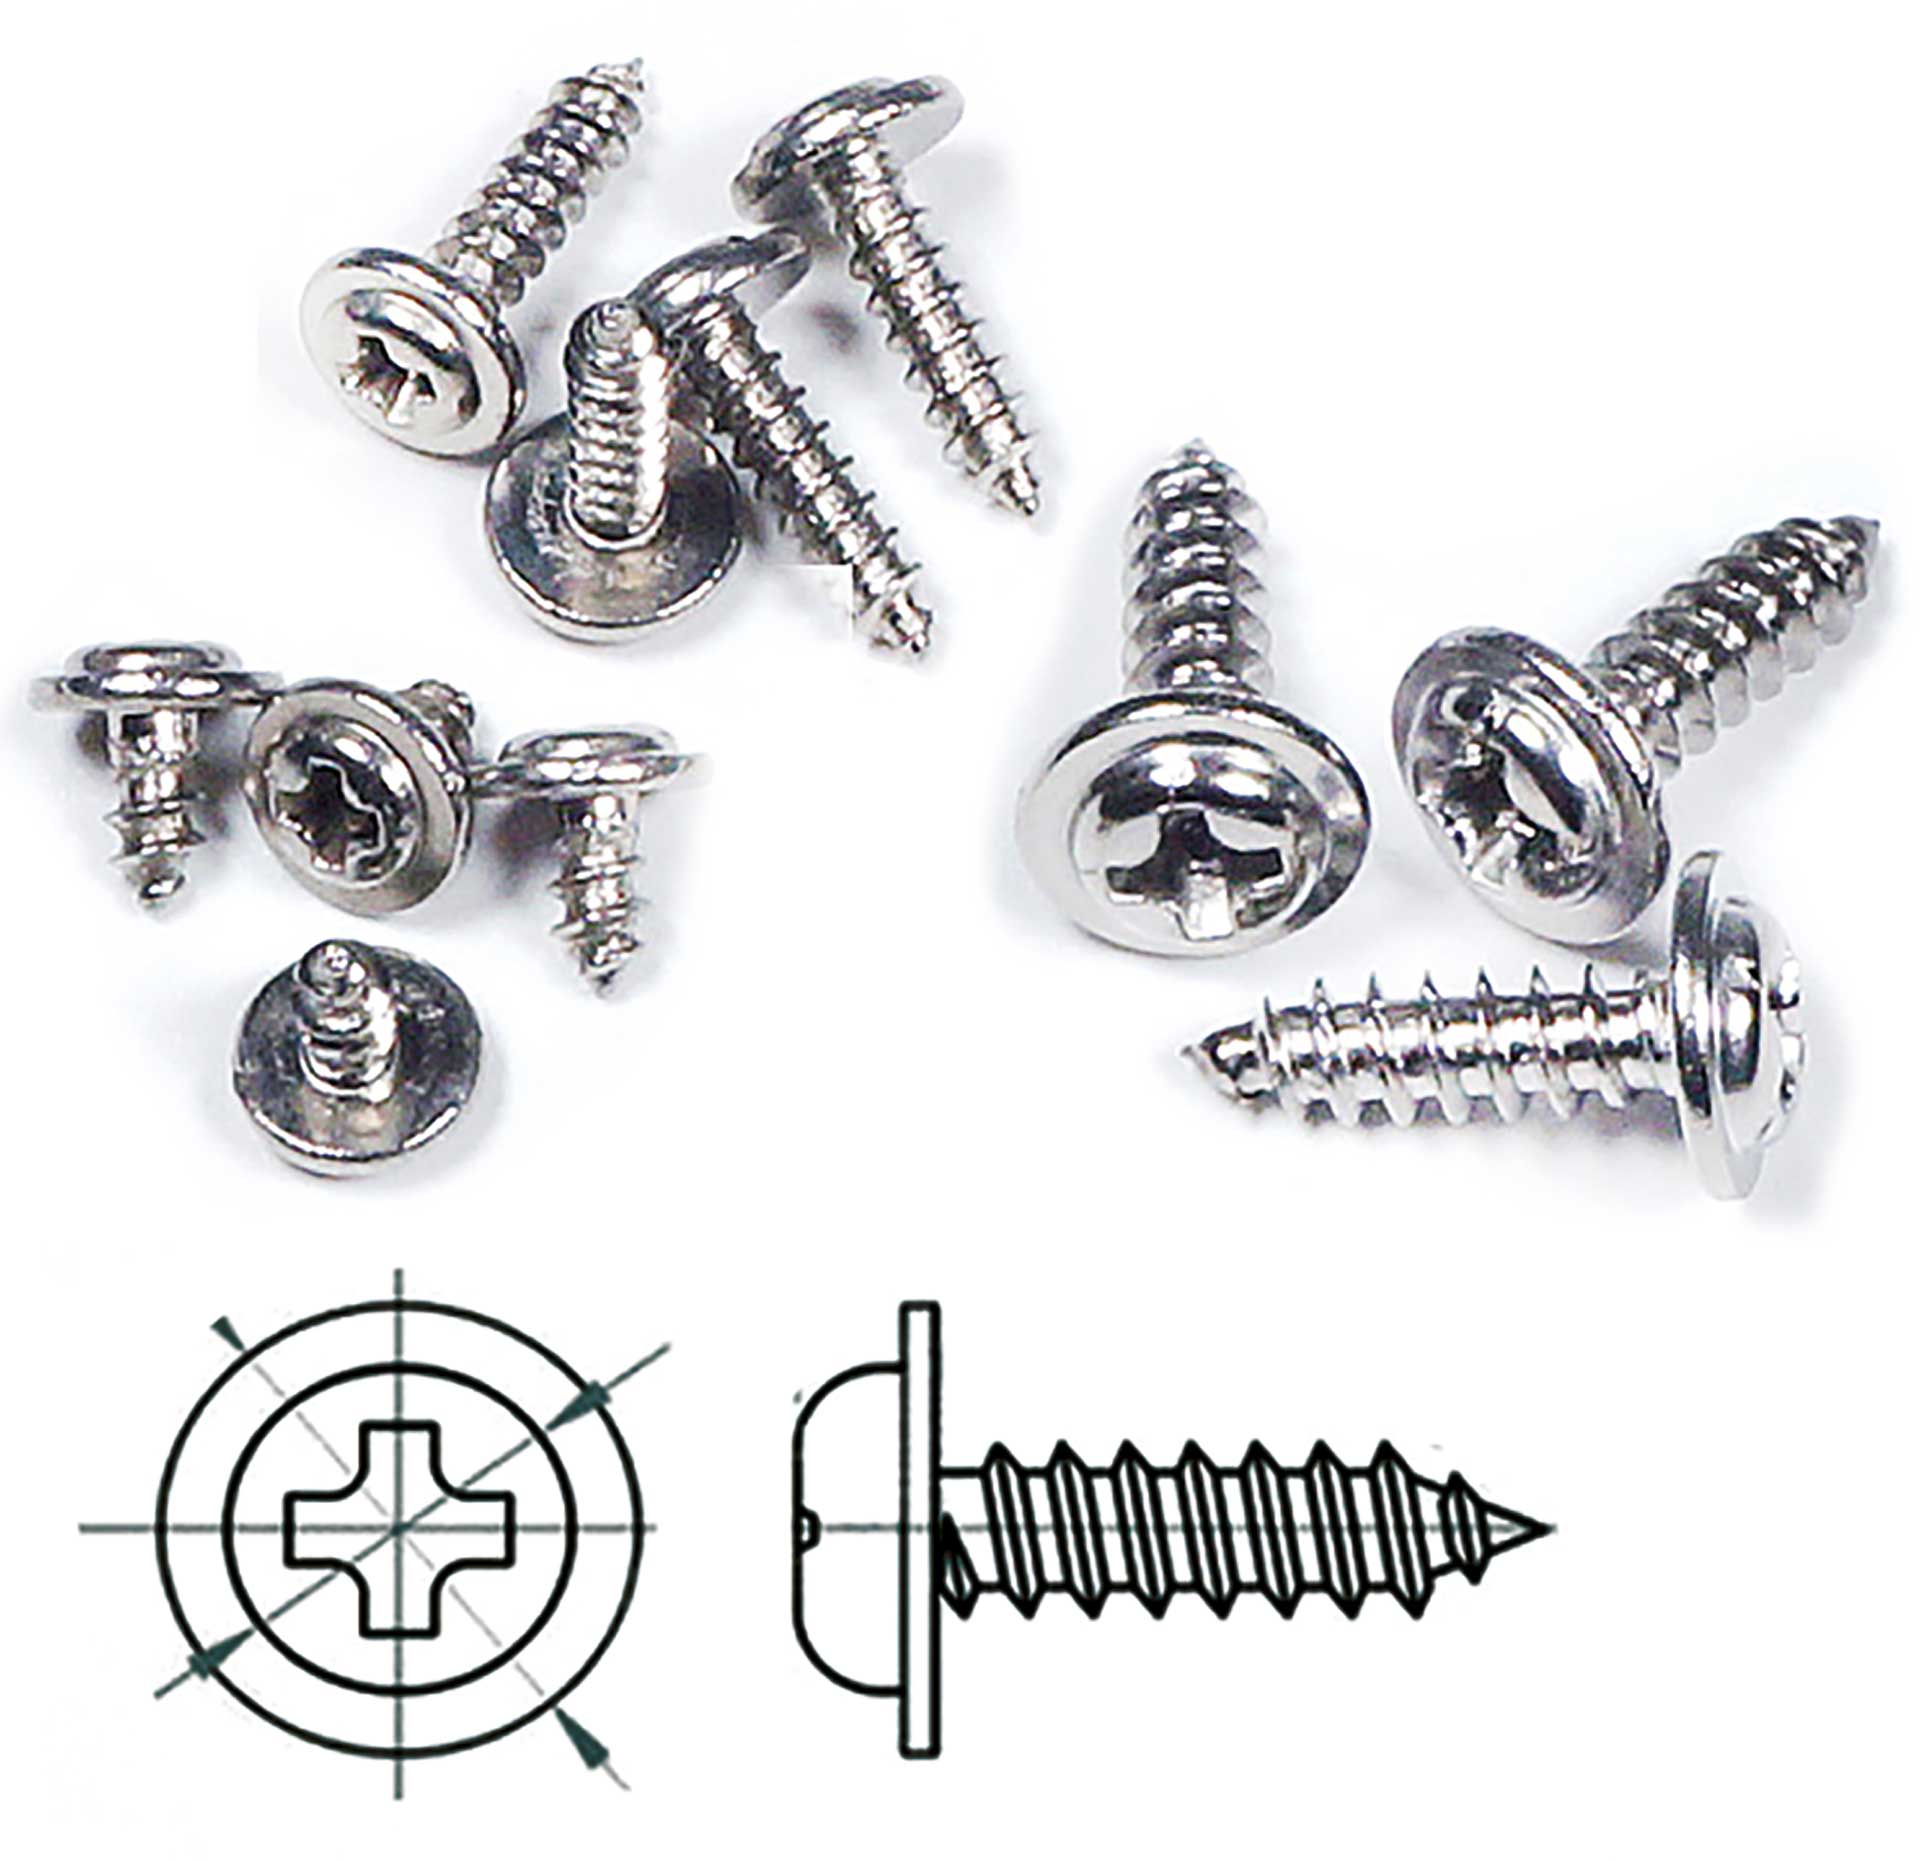 Robbe Modellsport Self-tapping screws with collar Phillips 2,3x4mm 30pcs. stainless steel